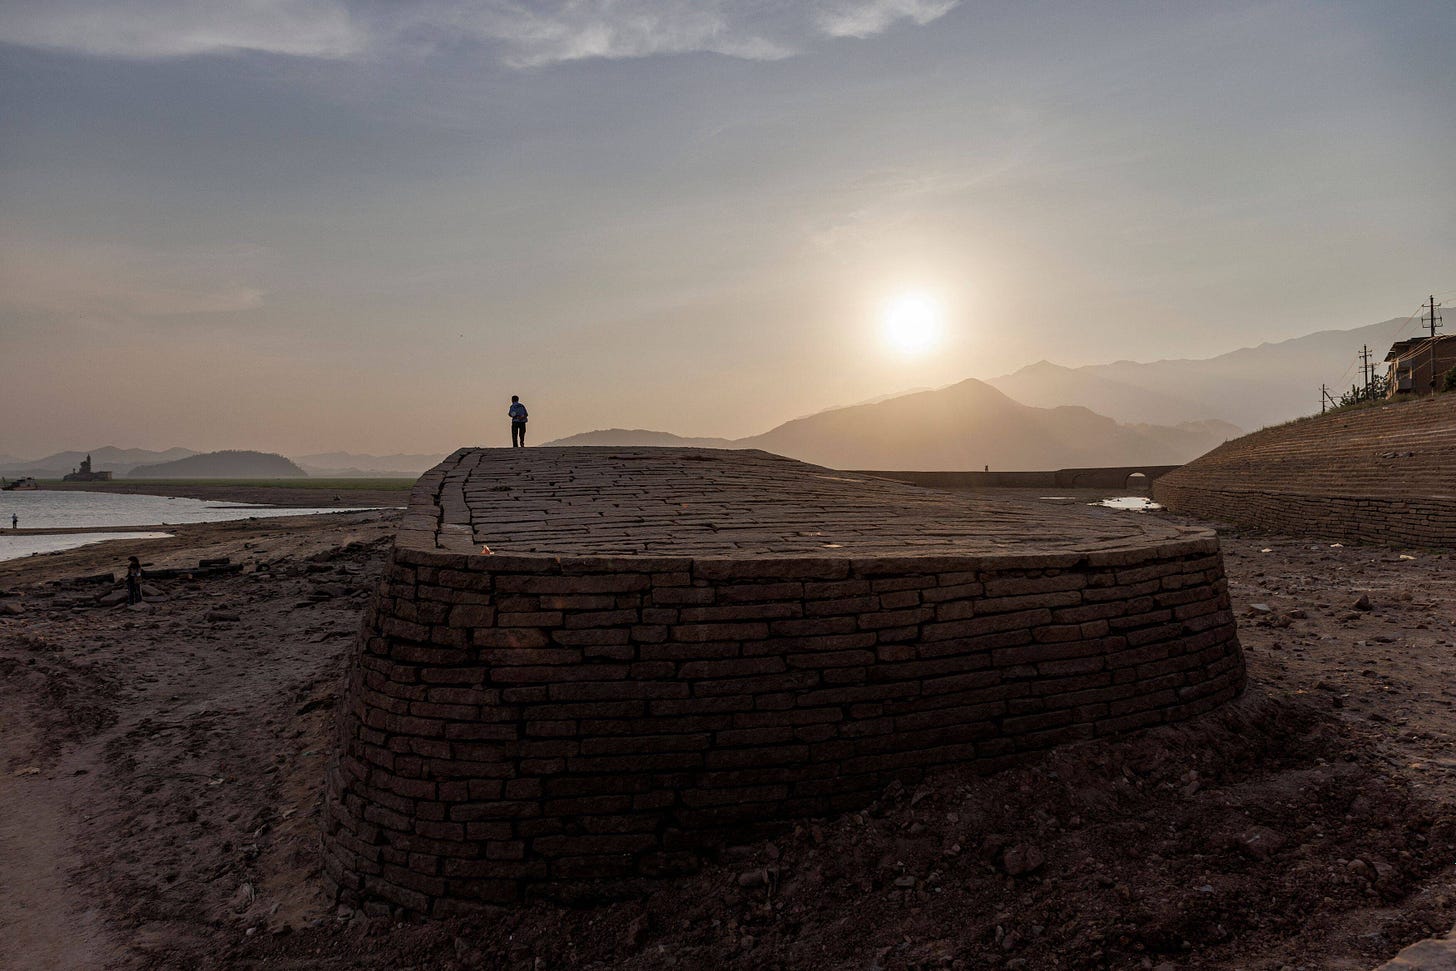 A person walks on the embankment of Poyang Lake, which exhibits low water levels because of a regional drought in Lushan, Jiangxi province, China, on Aug. 24. (Thomas Peter/Reuters)